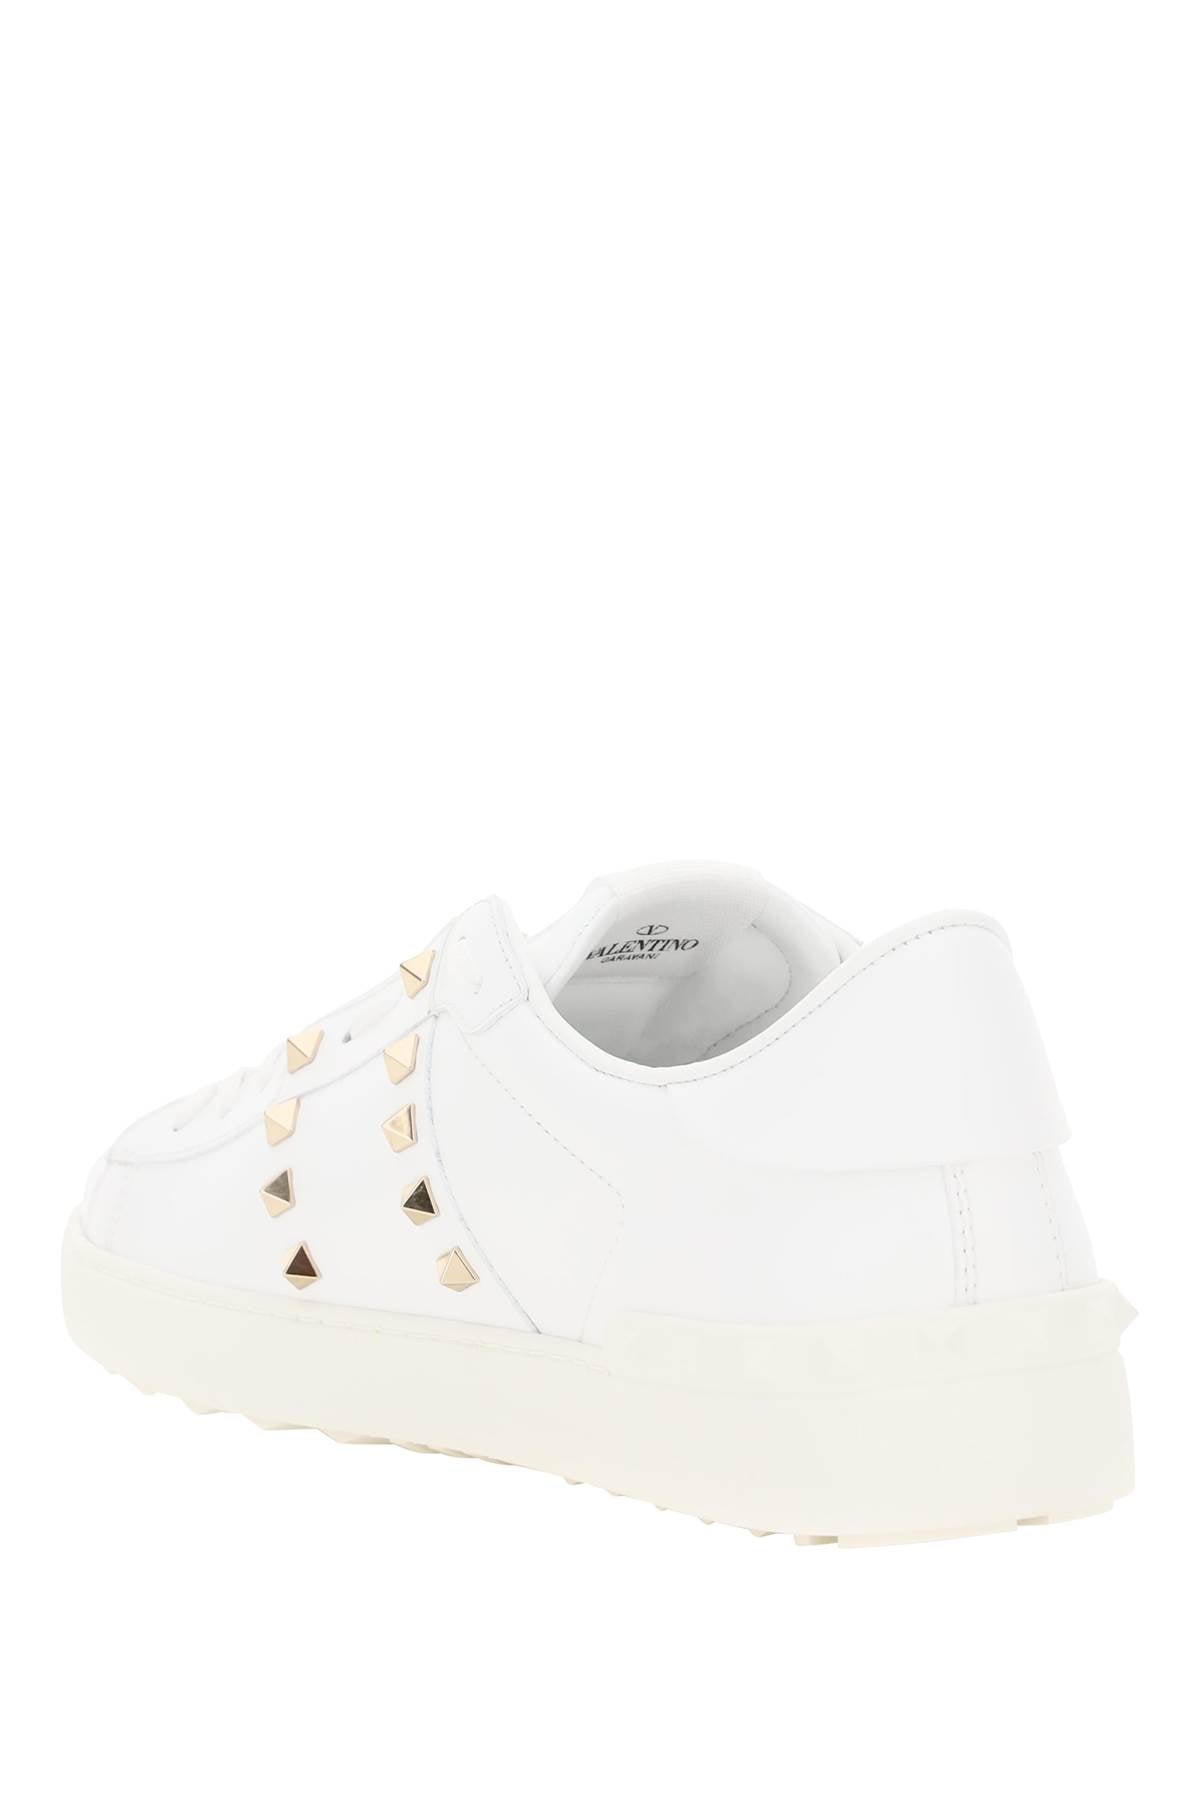 VALENTINO Minimalist White Leather Sneakers for Women - SS24